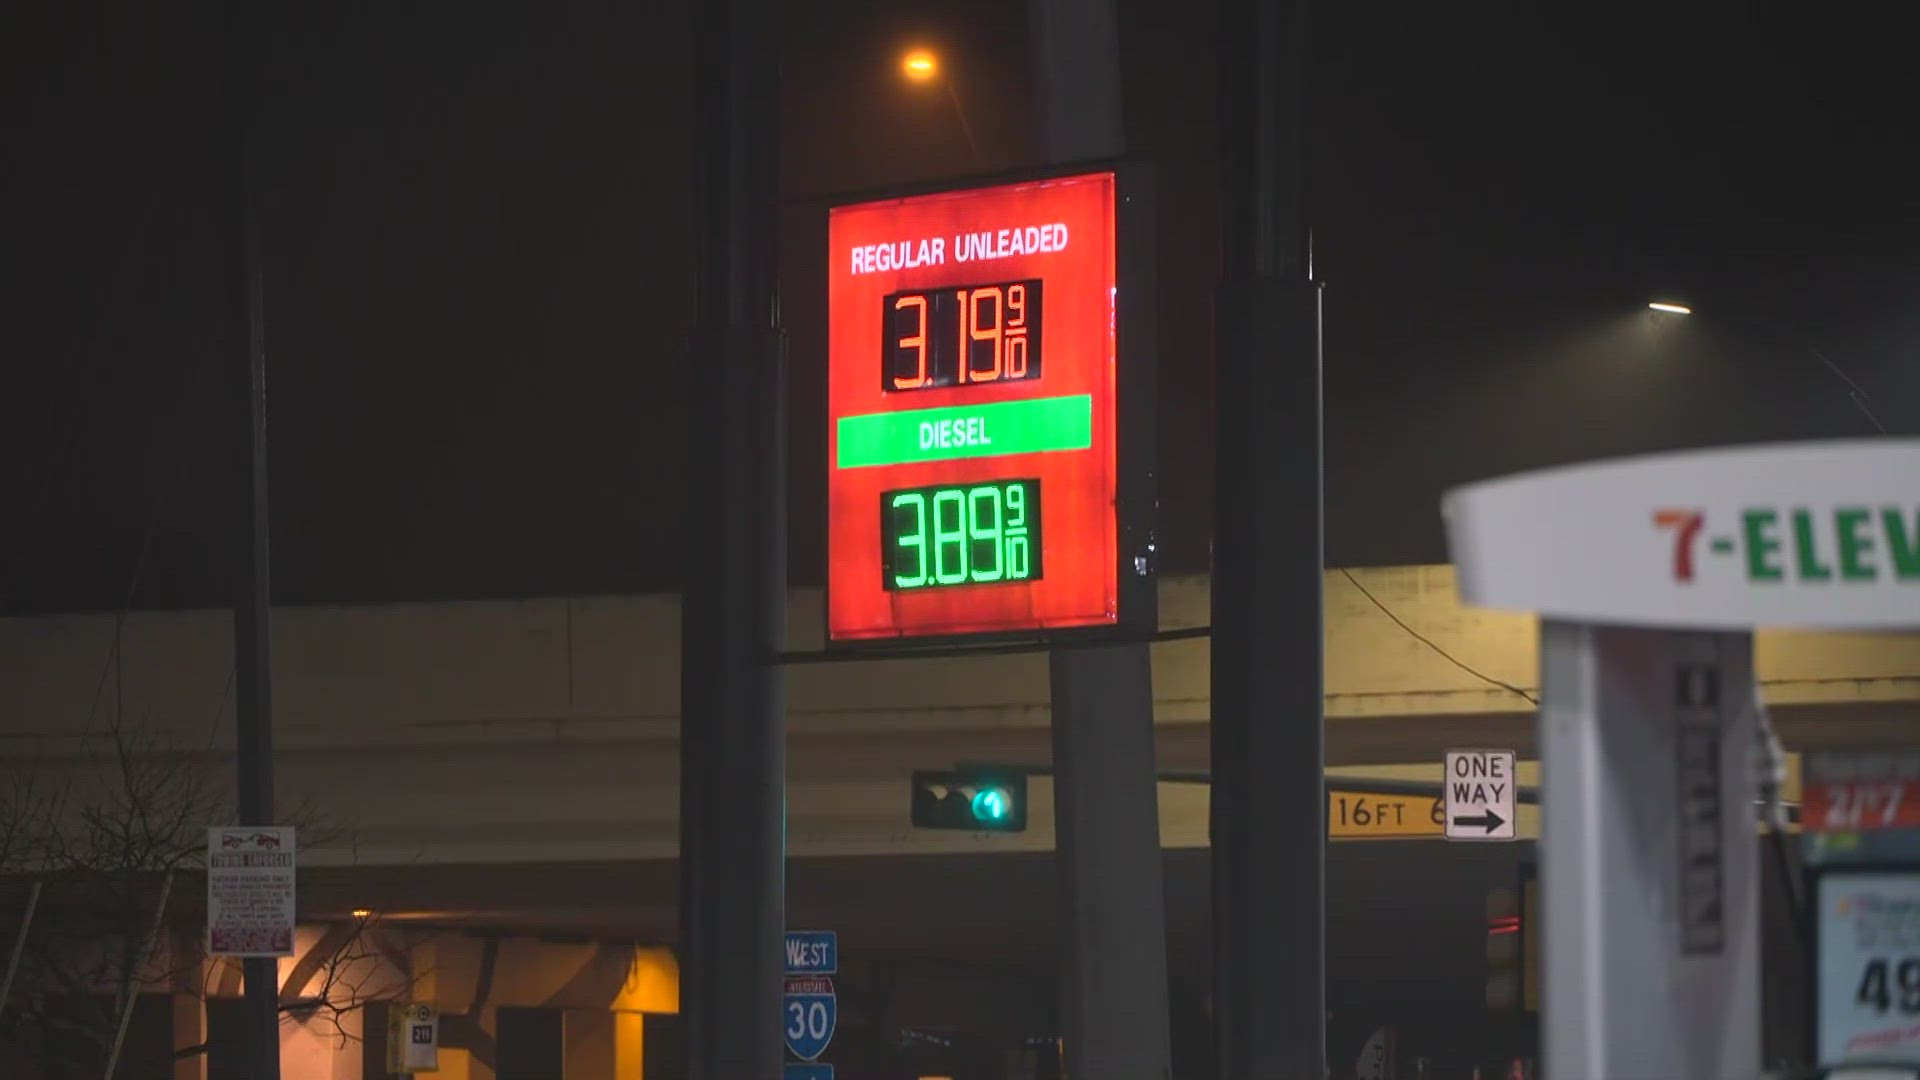 WFAA reporter Chris Sadeghi explains the reasons for the uptick in gas prices just in time for spring and summer.